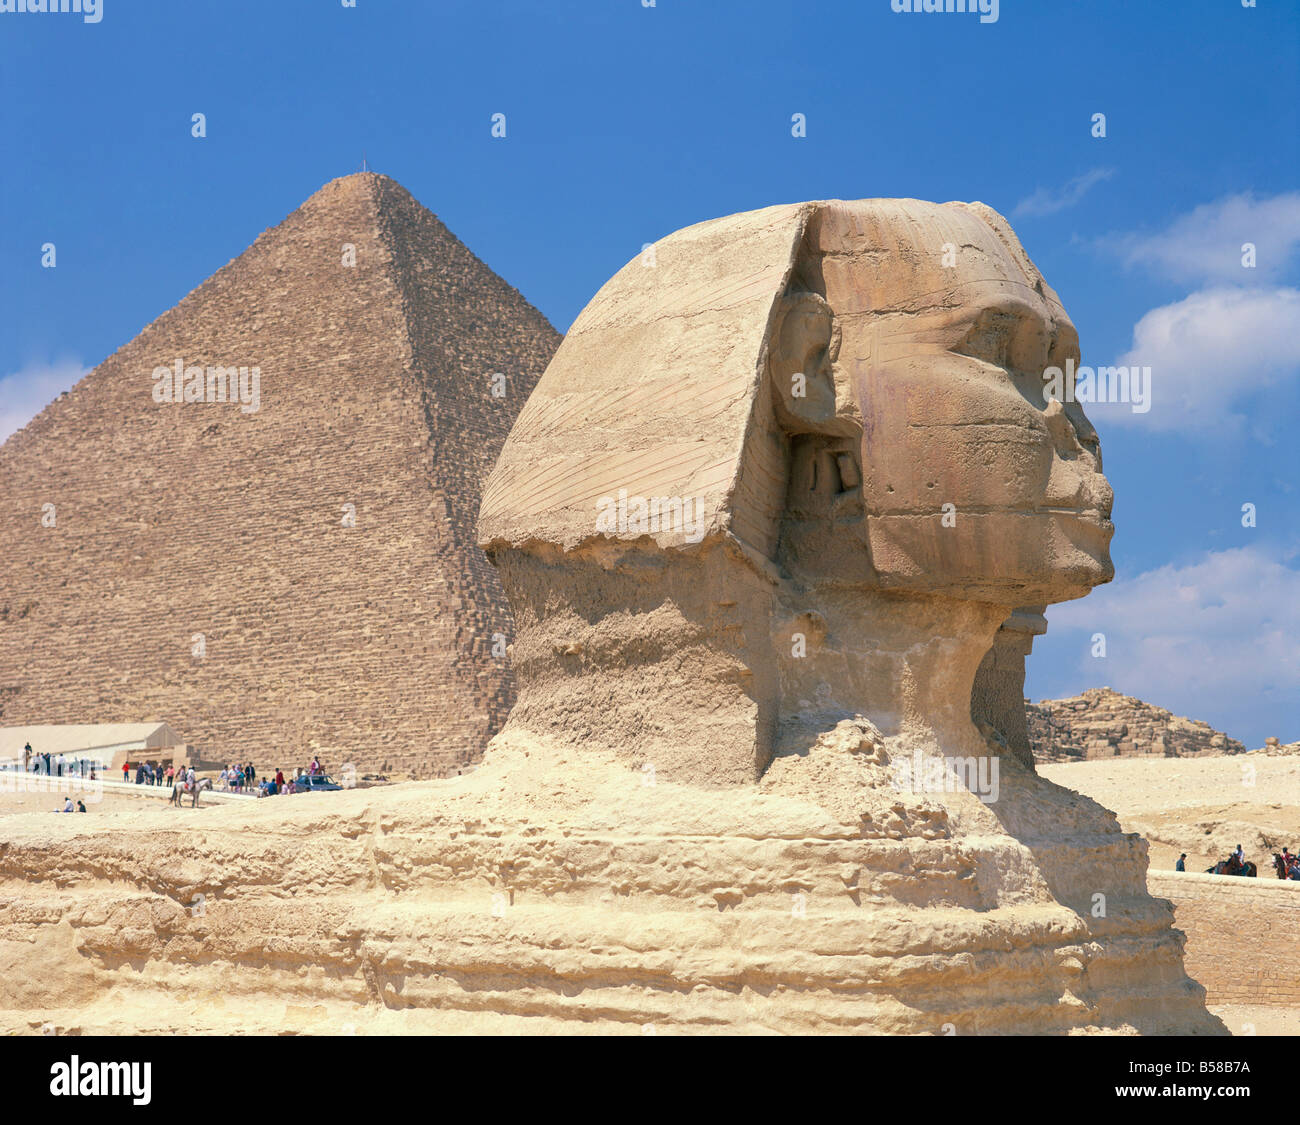 The Great Sphinx and one of the pyramids at Giza UNESCO World Heritage Site Cairo Egypt North Africa Africa Stock Photo